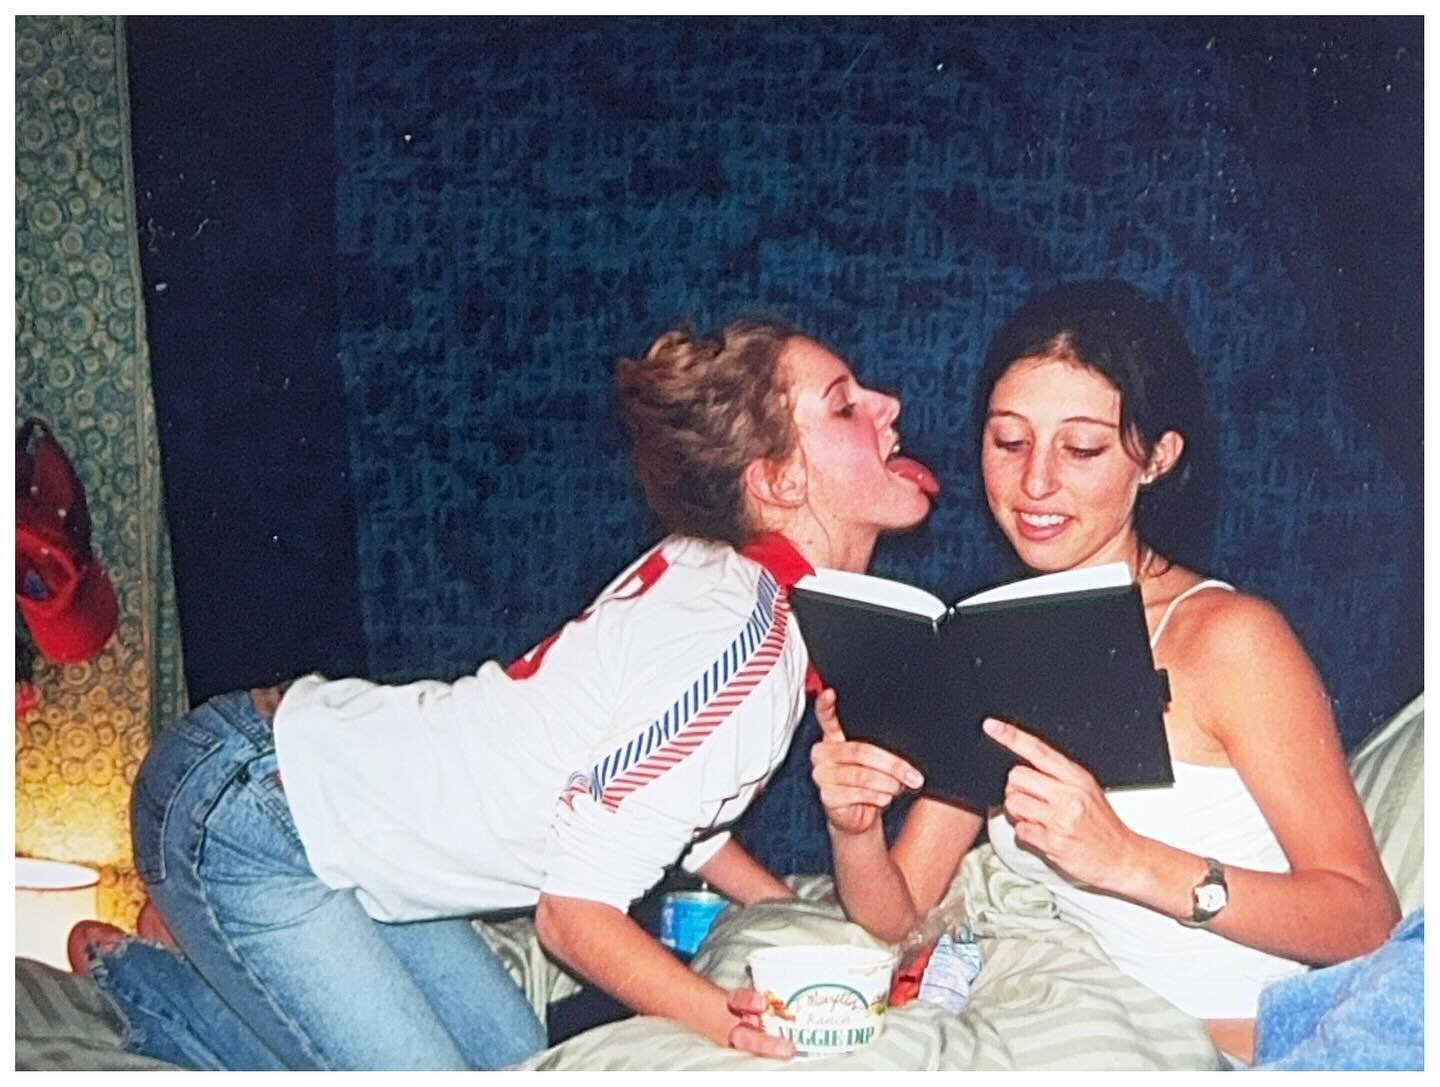 Lana Del Rey licking my roommate (2002?)

I made an offhand reference to this photo in the comments of my friend @katieschlosslsw&rsquo;s post a while back &amp; am still fielding DMs from superfans about it...

Lizzy (as I knew her) was only ever ki